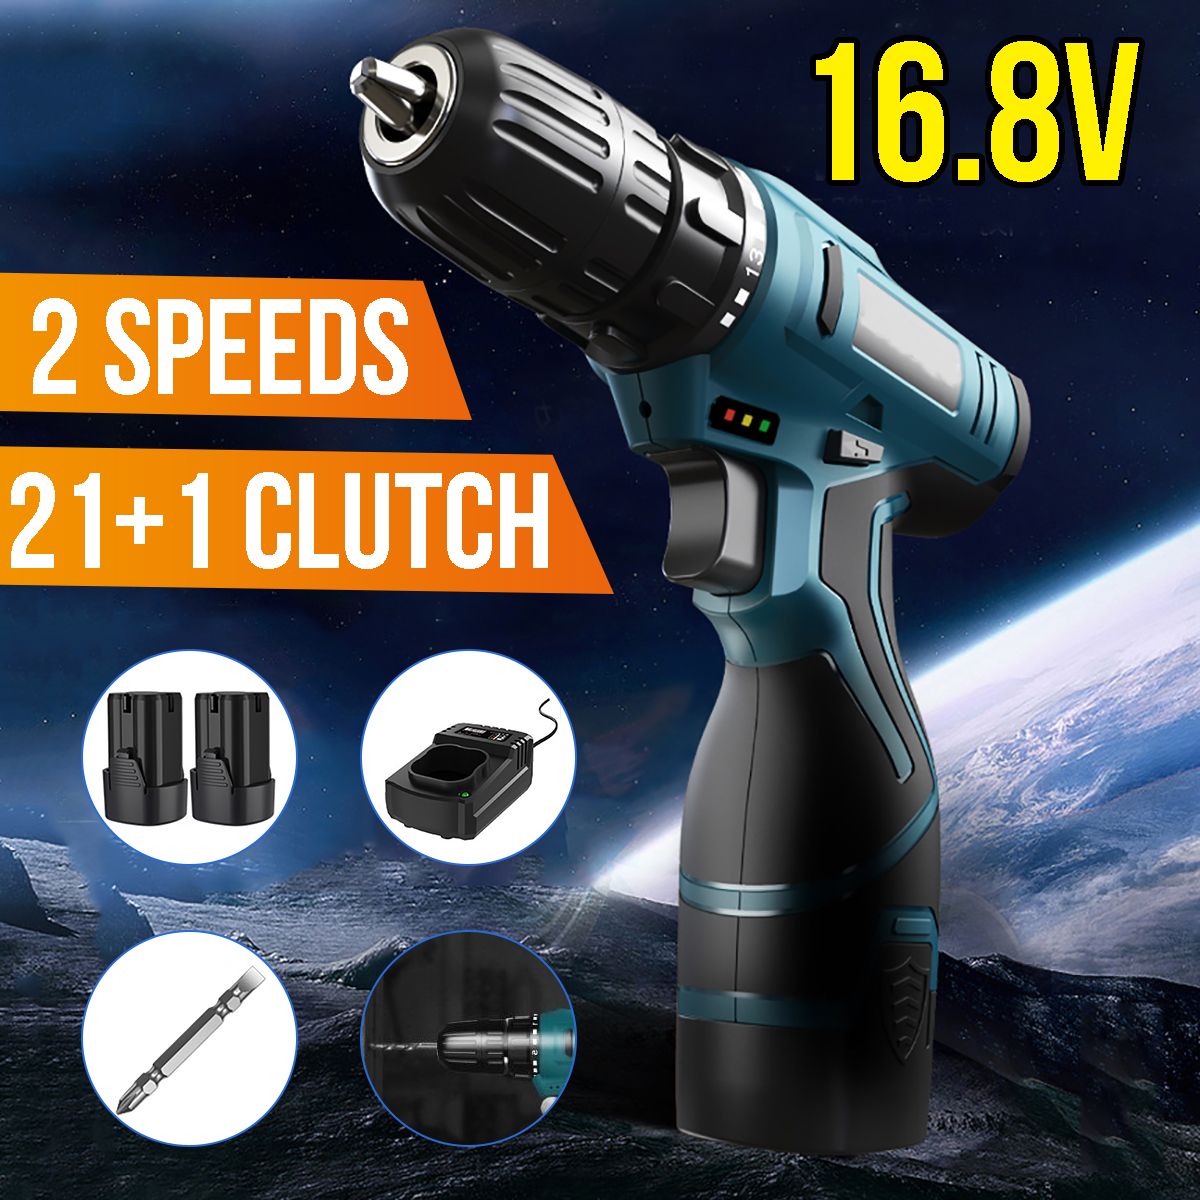 168V-38quot-Impact-Drill-1350rpm-2-Speeds-LED-Cordless-Drill-Driver-Kit-w-Li-Ion-Battery-amp-Charger-1762901